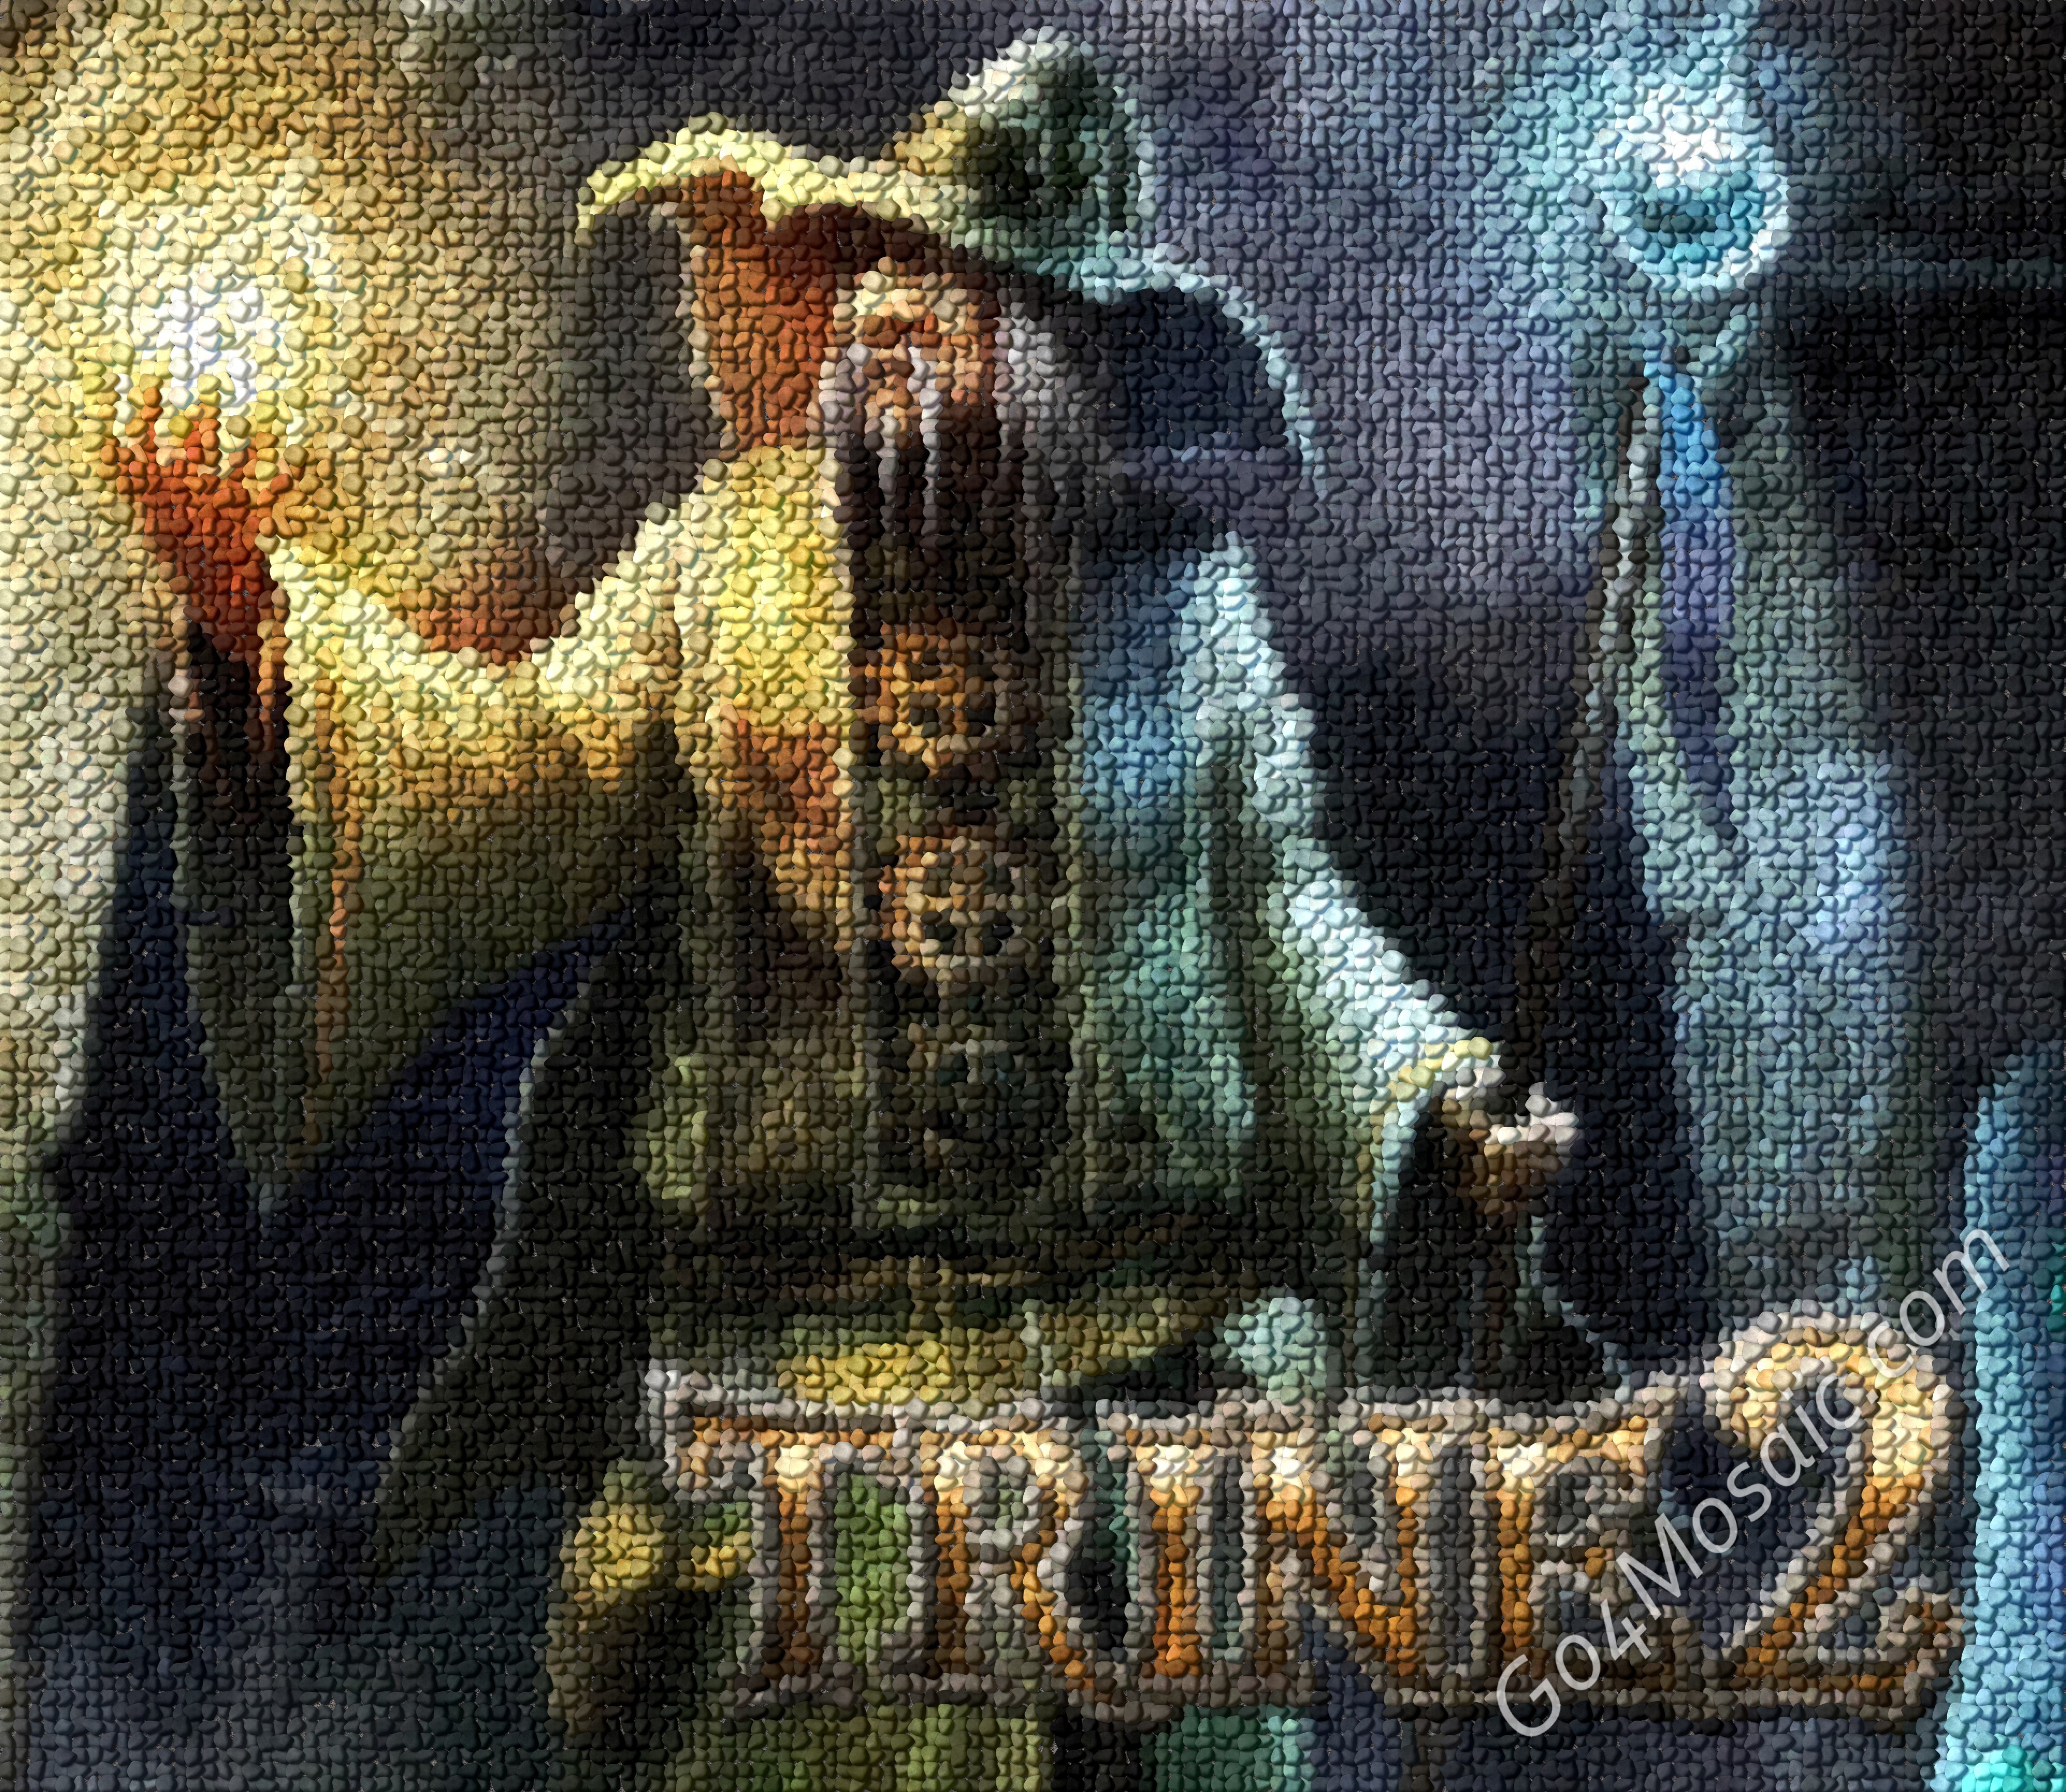 Trine 2 mosaic from Pebbles